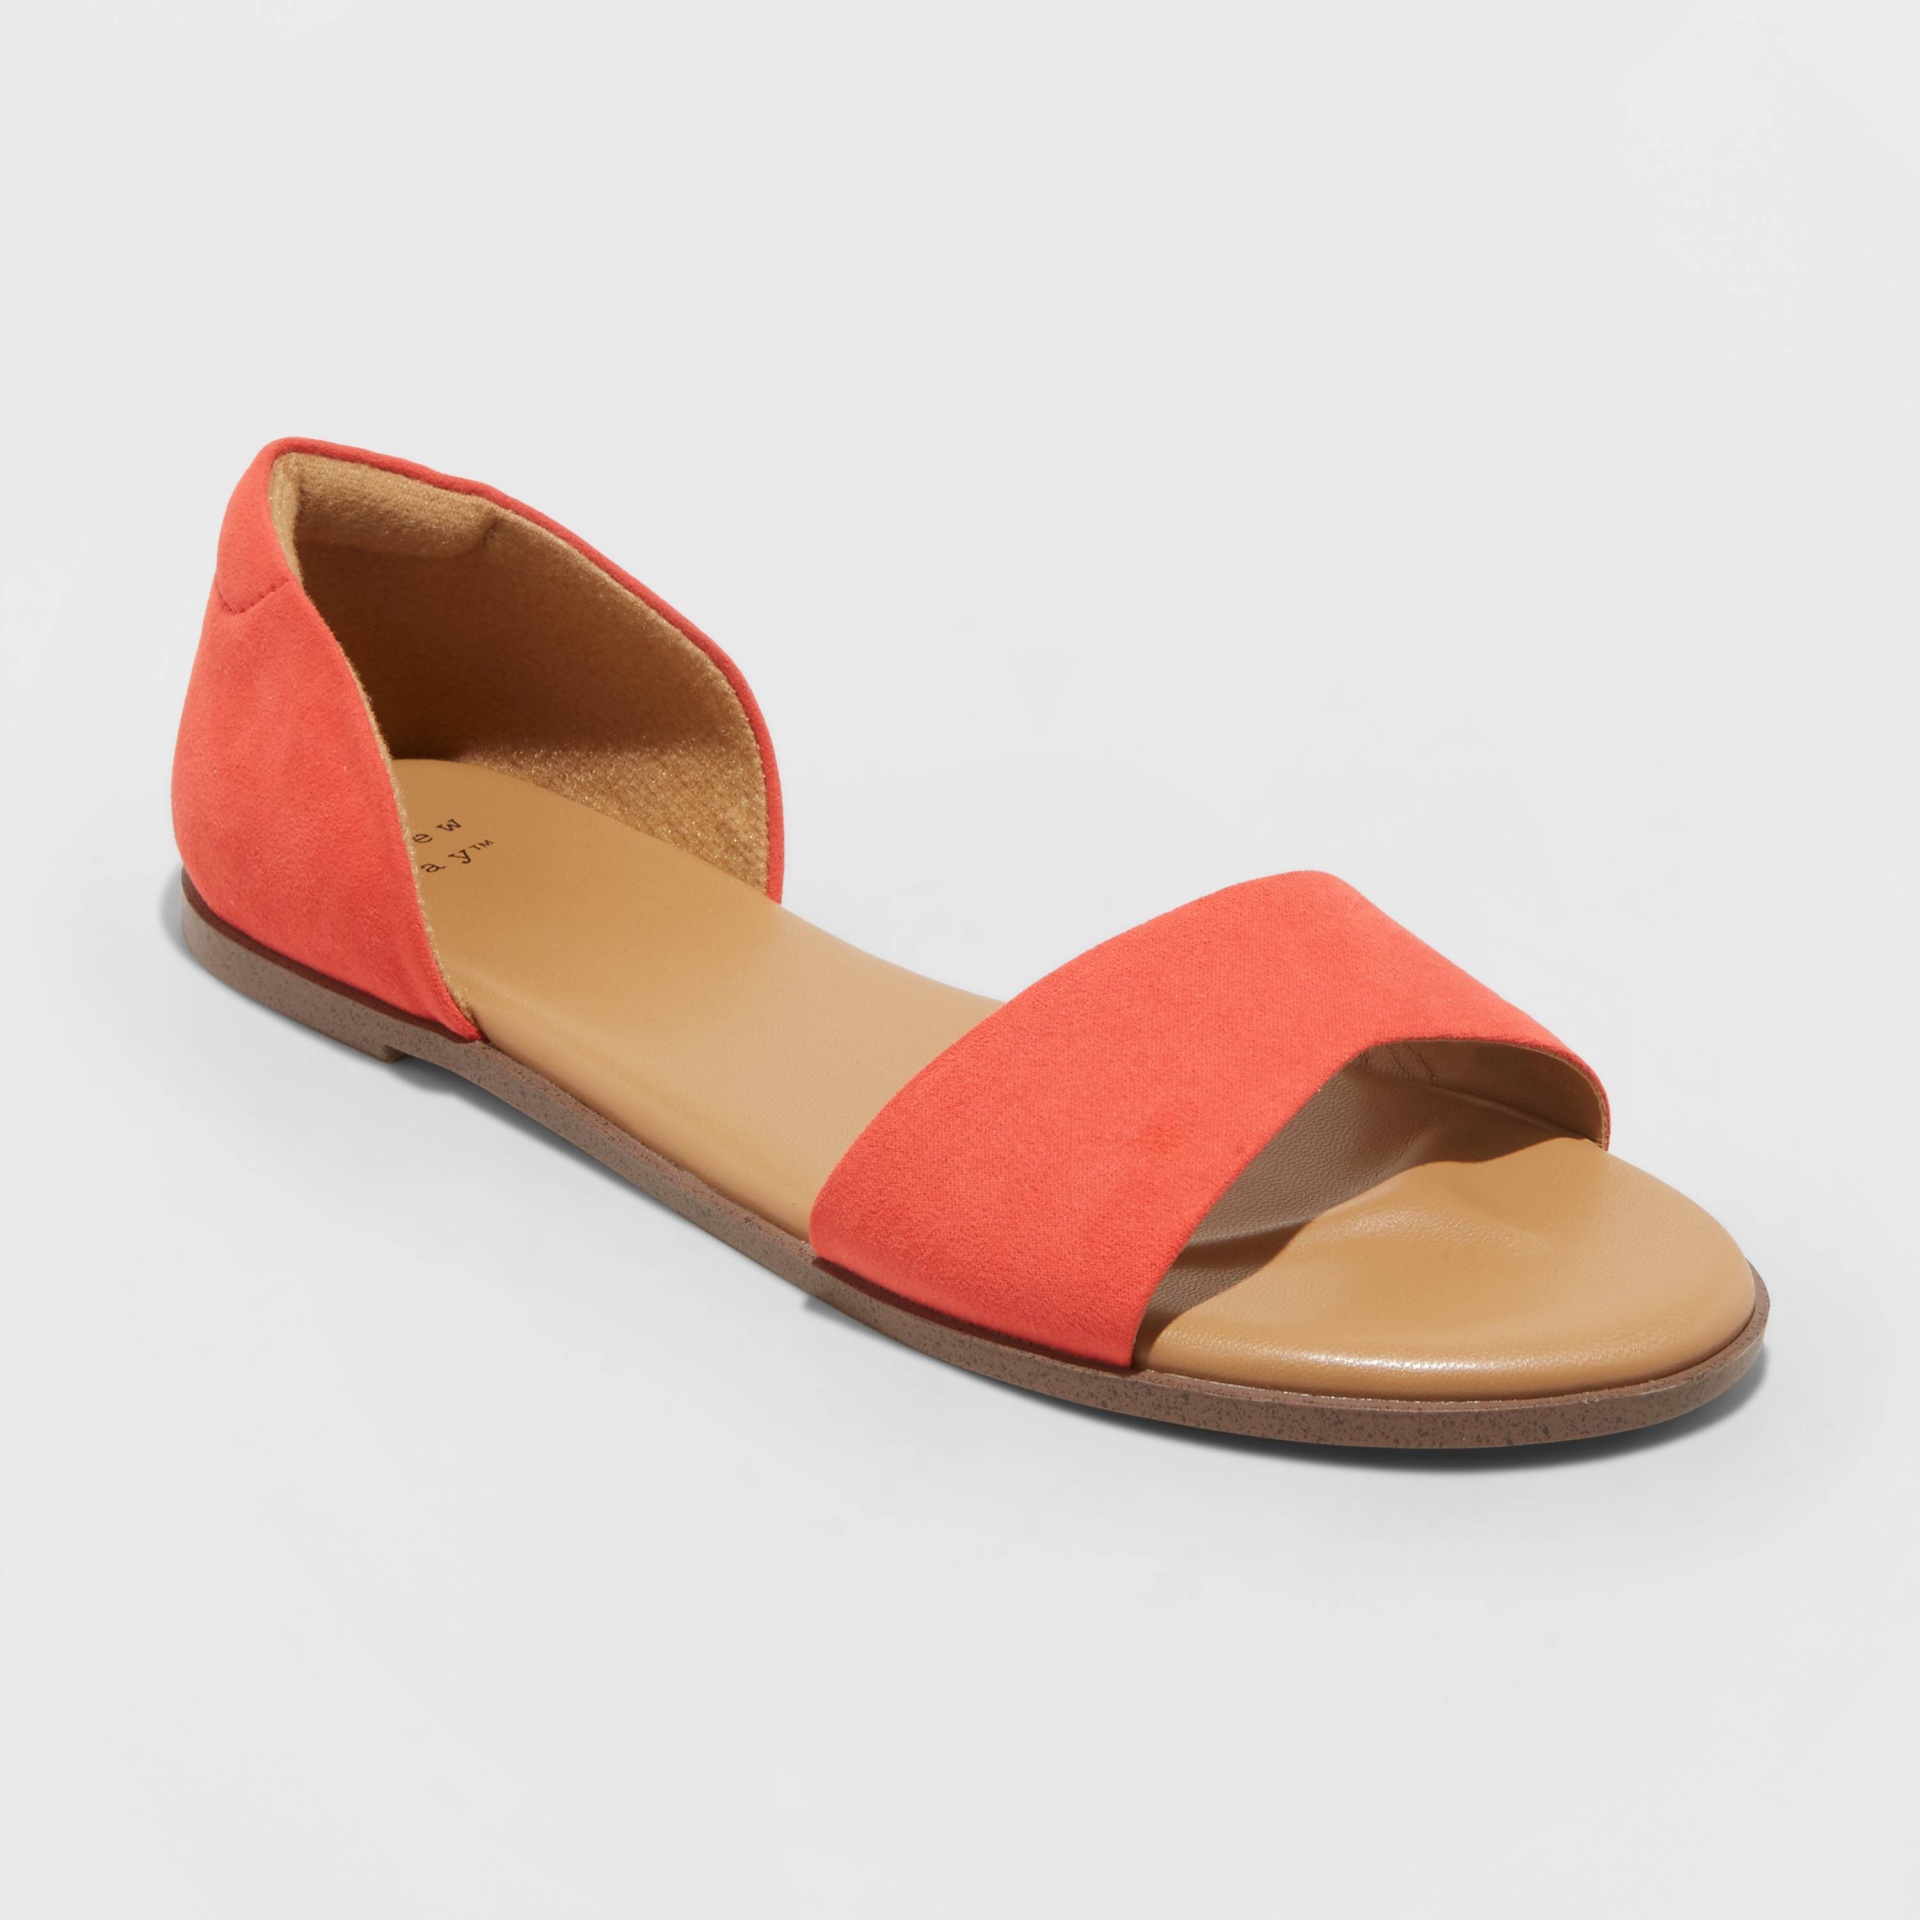 slide 1 of 4, Women's Ann Two Piece Slide Sandals - A New Day Coral 7.5, 1 ct